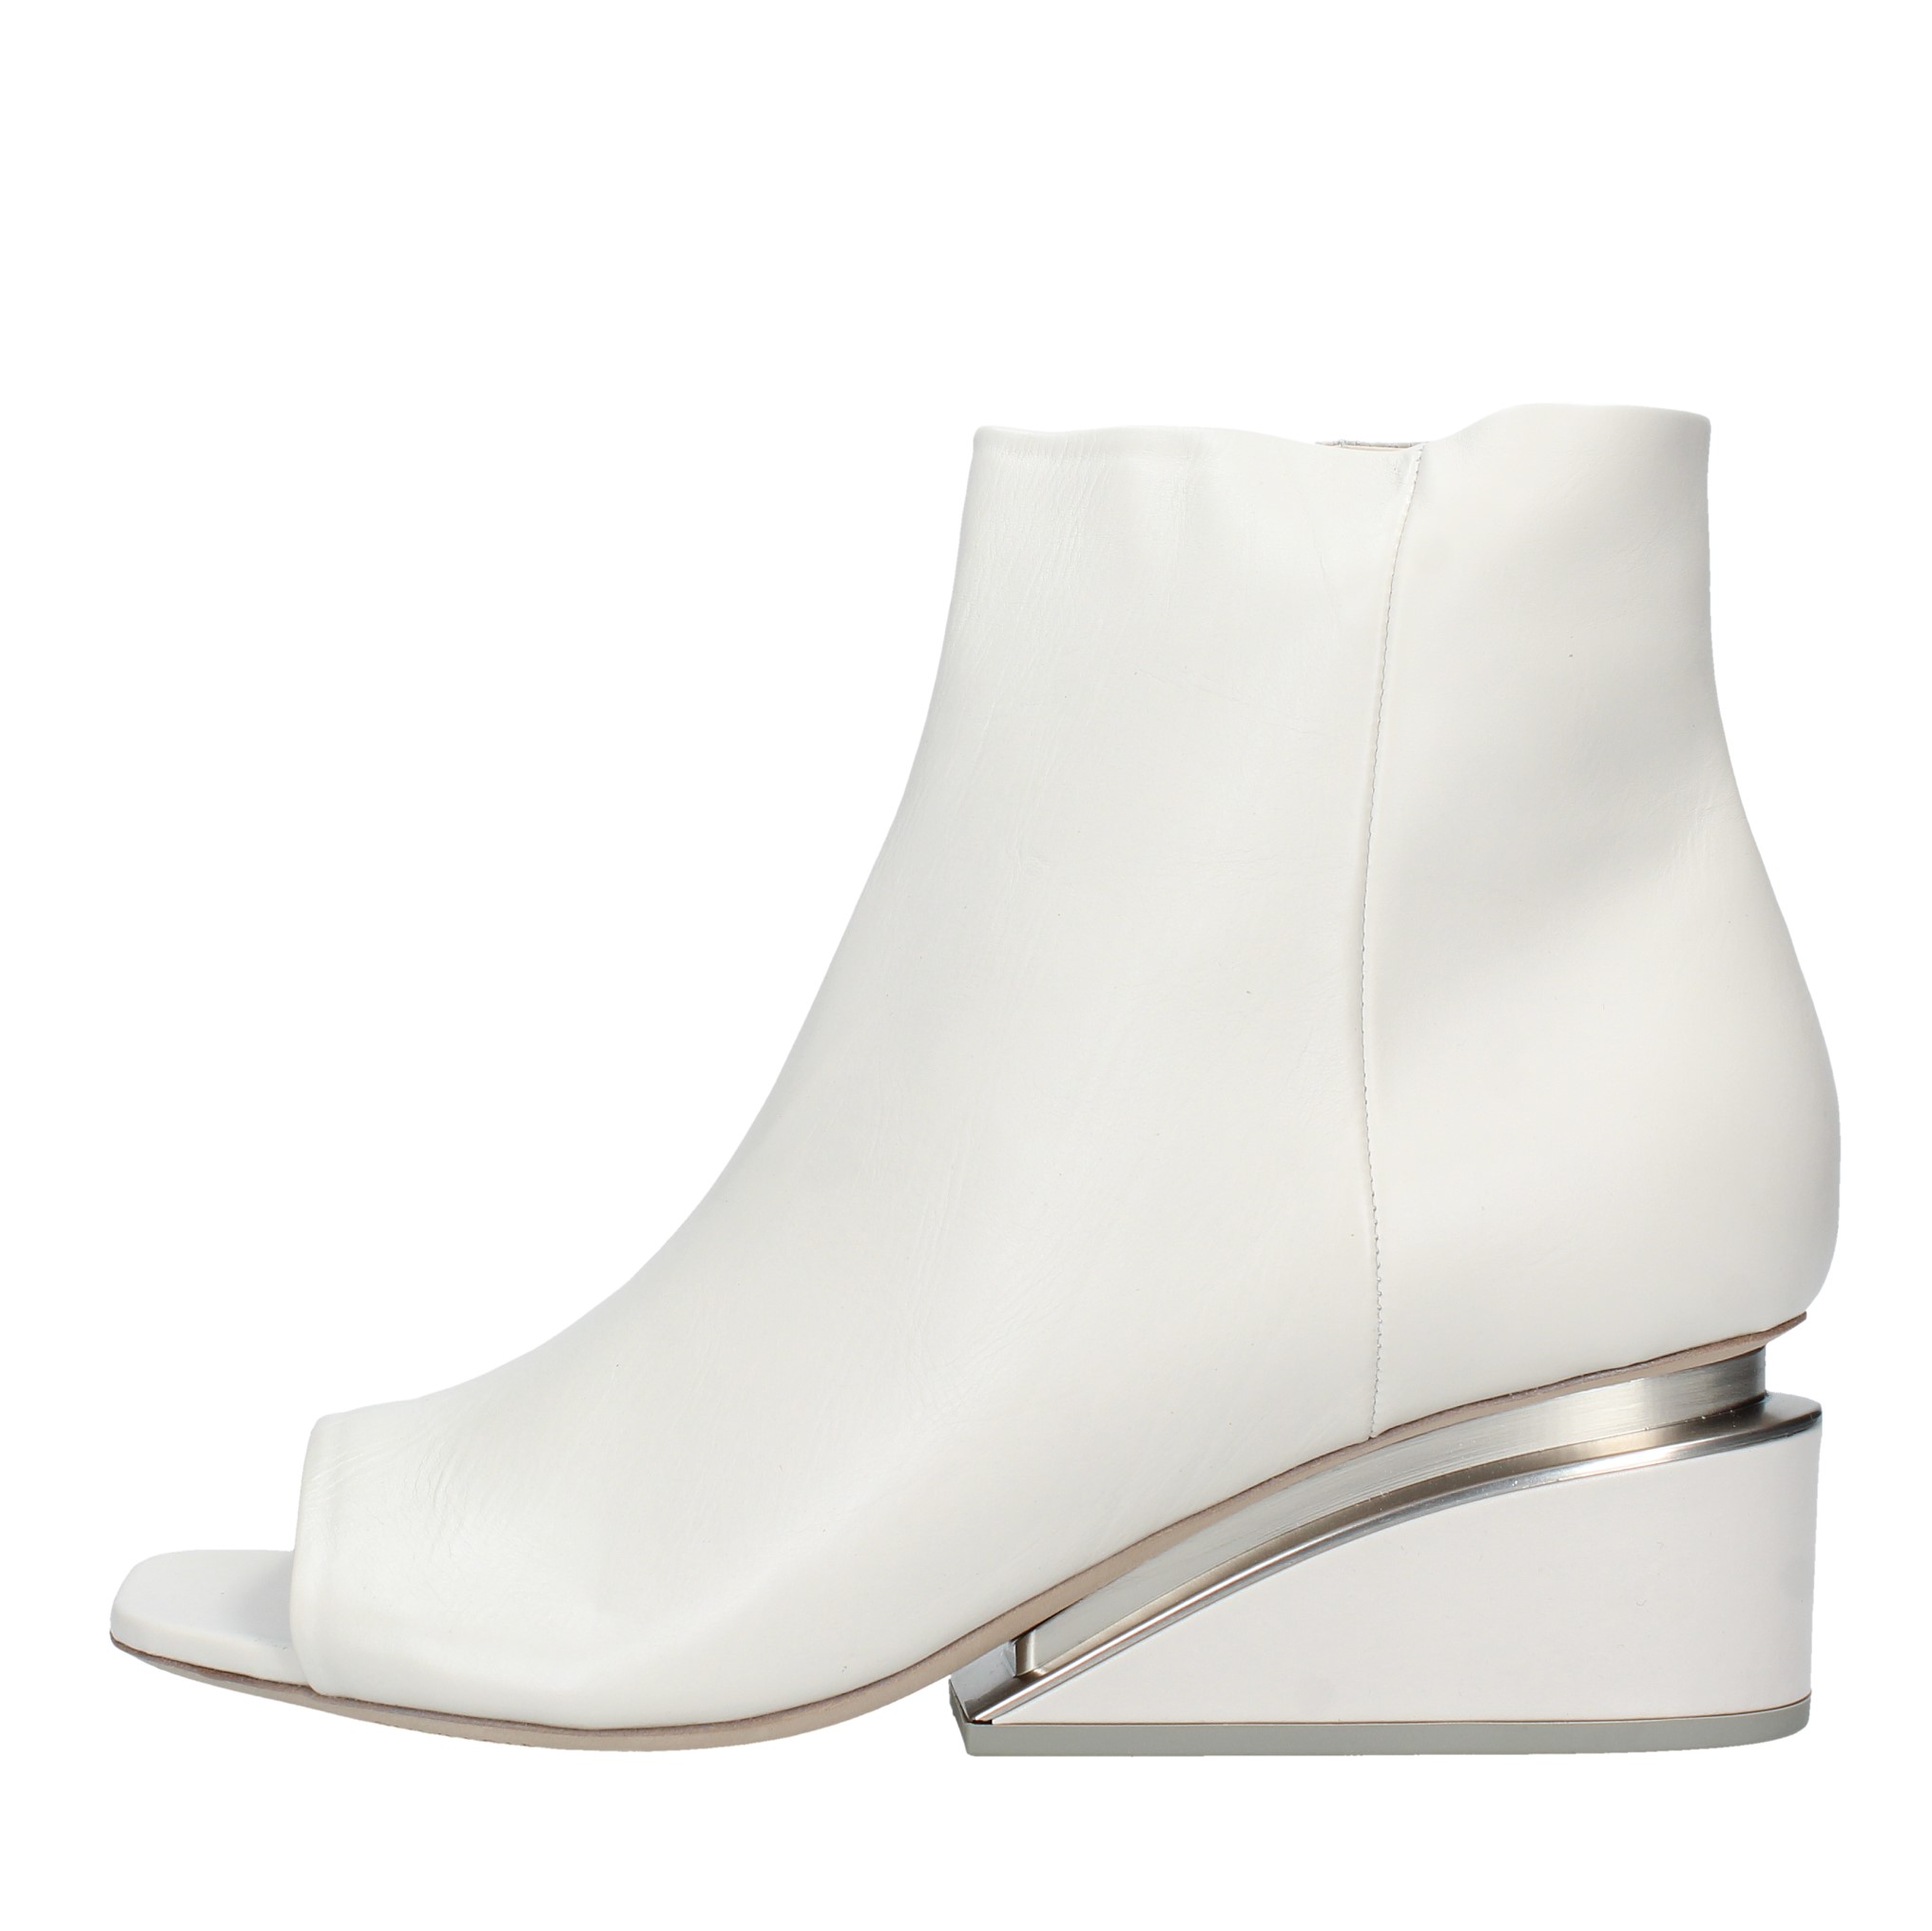 Ankle and ankle boots No - VIC MATIE' - Ginevra calzature